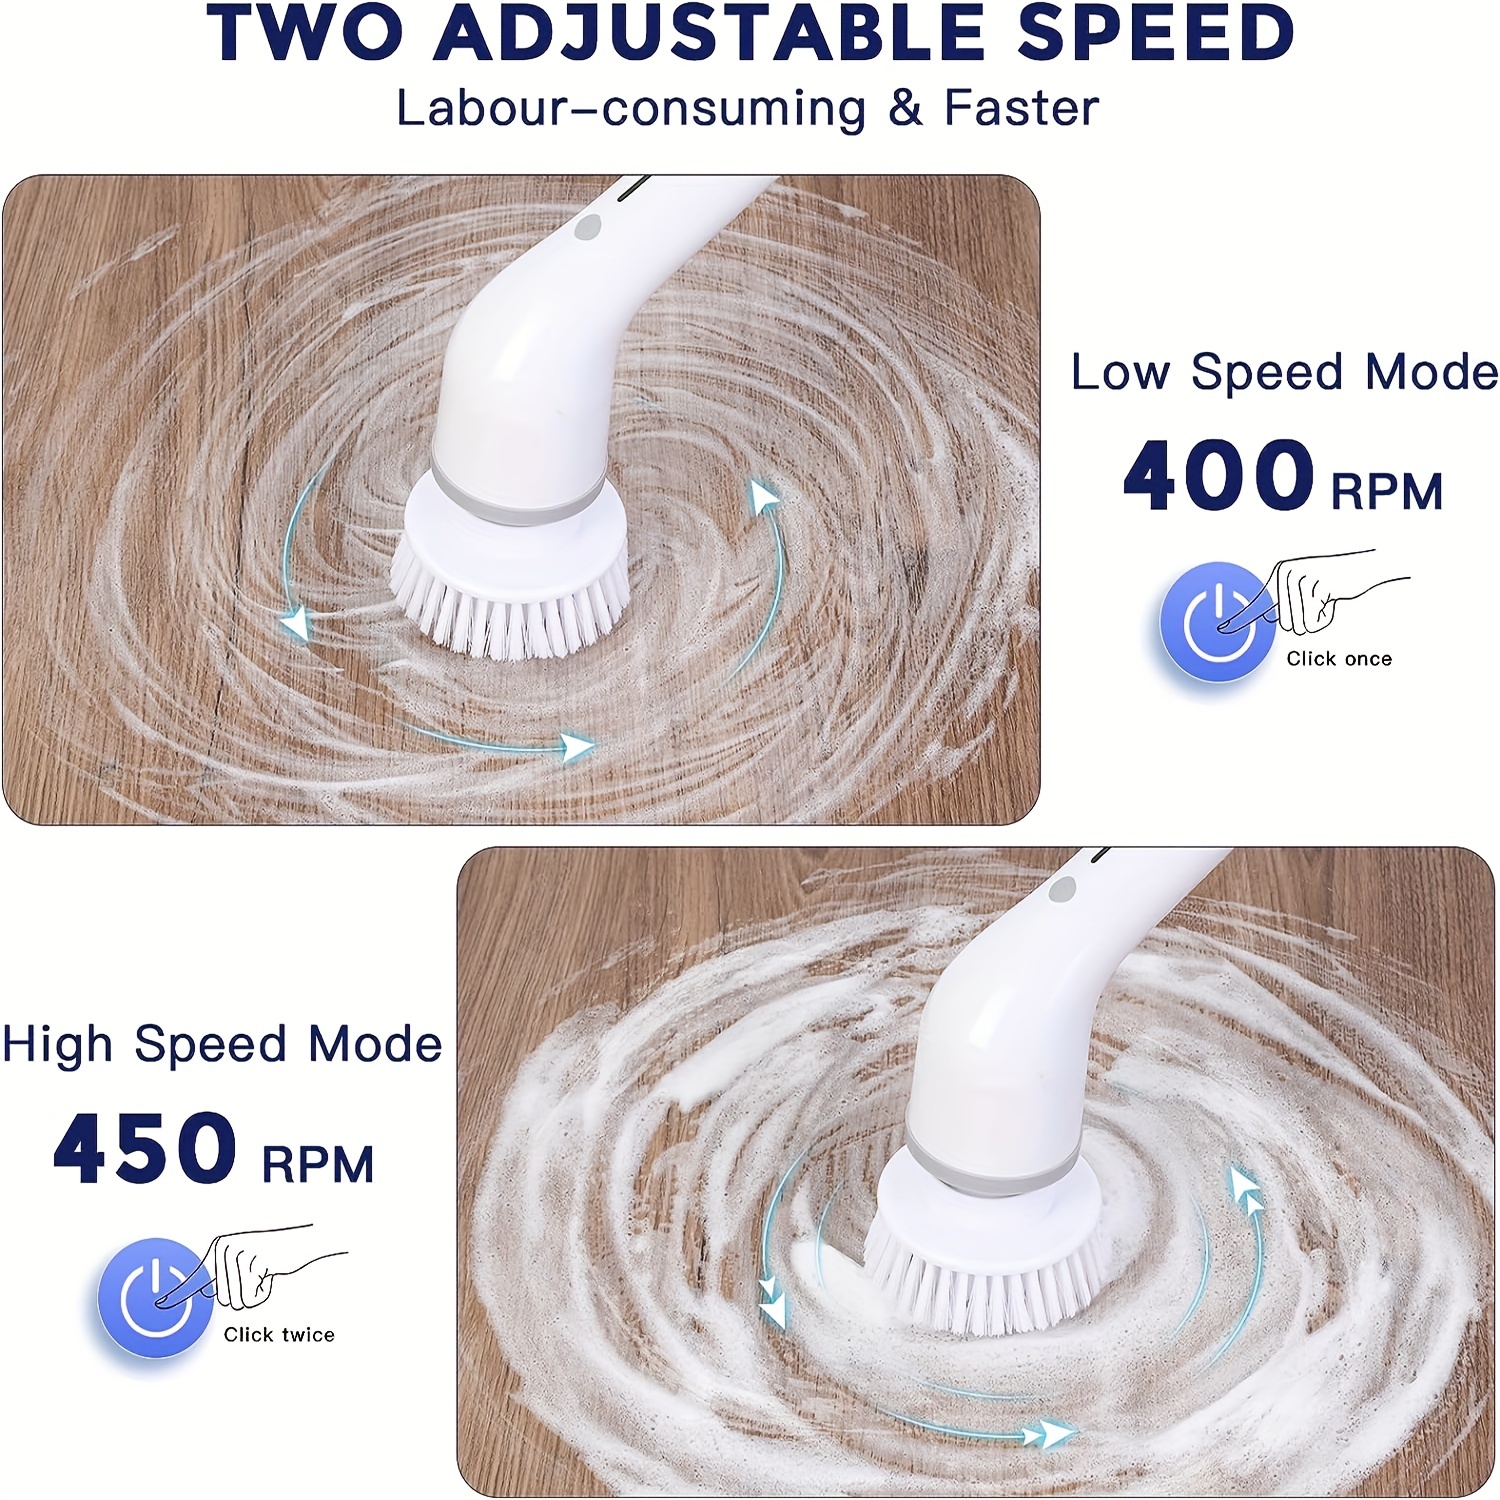 1set, Electric Spin Scrubber, Cordless Electric Shower Scrubber With 8  Replacement Brush Head, 2 Adjustable Speed, Bathroom Scrub Brush, Power Bathtub  Scrubber With Extension Long Handle For Bathtub,Tile, Floor, Bathtub, Bathroom  Cleaning